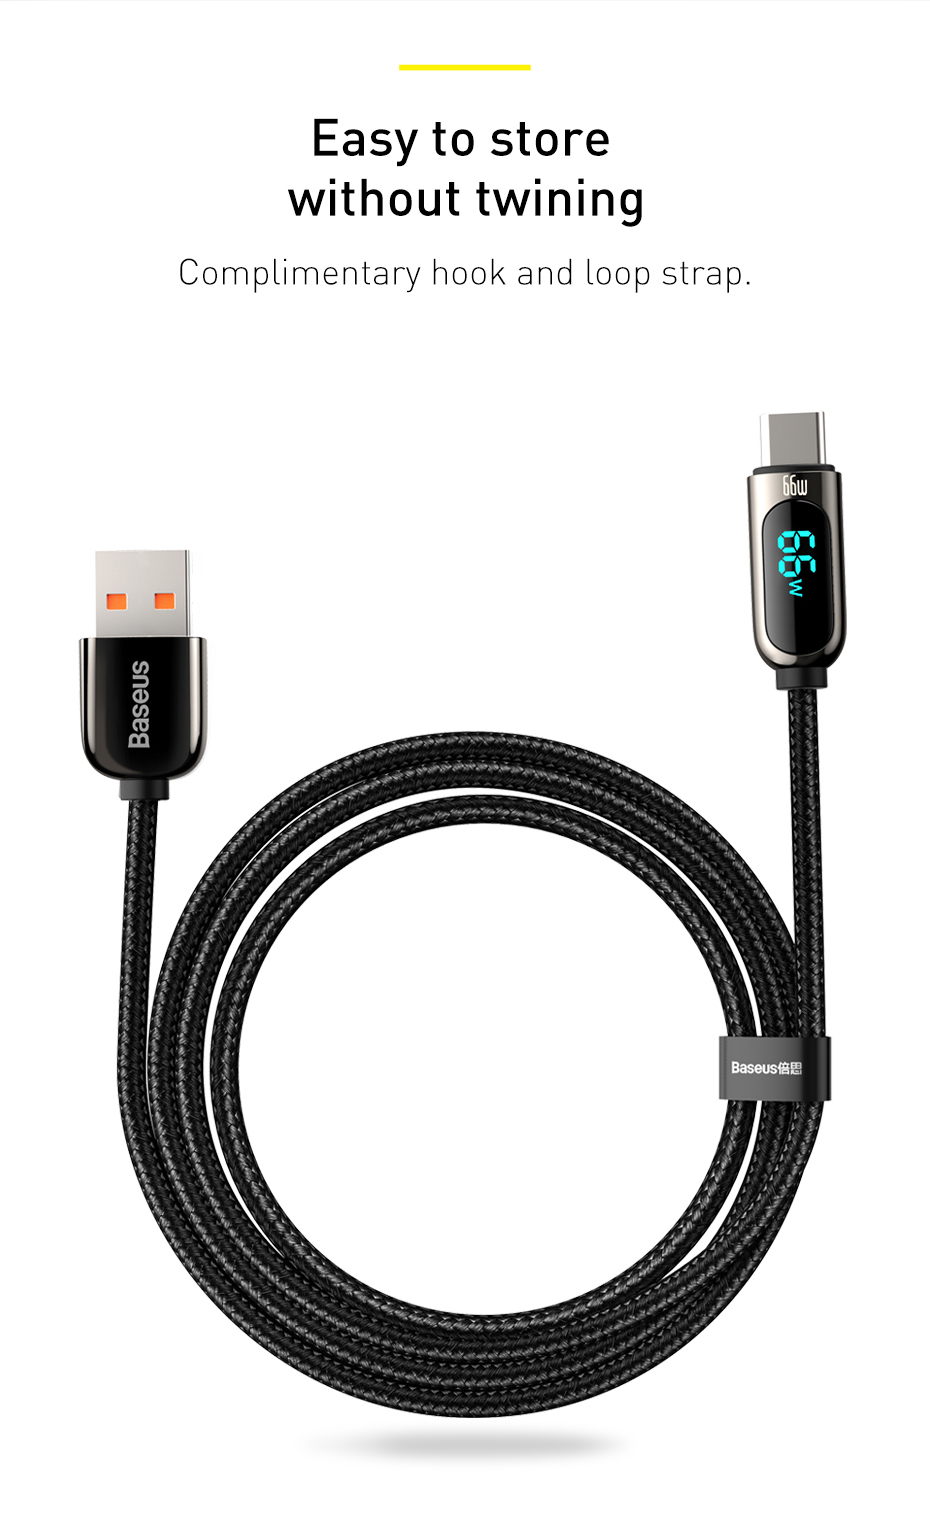 Baseus-66W-USB-to-USB-C-Digital-Display-Cable-Fast-Charging-Data-Transmission-Cord-Line-12m-long-For-1900290-12